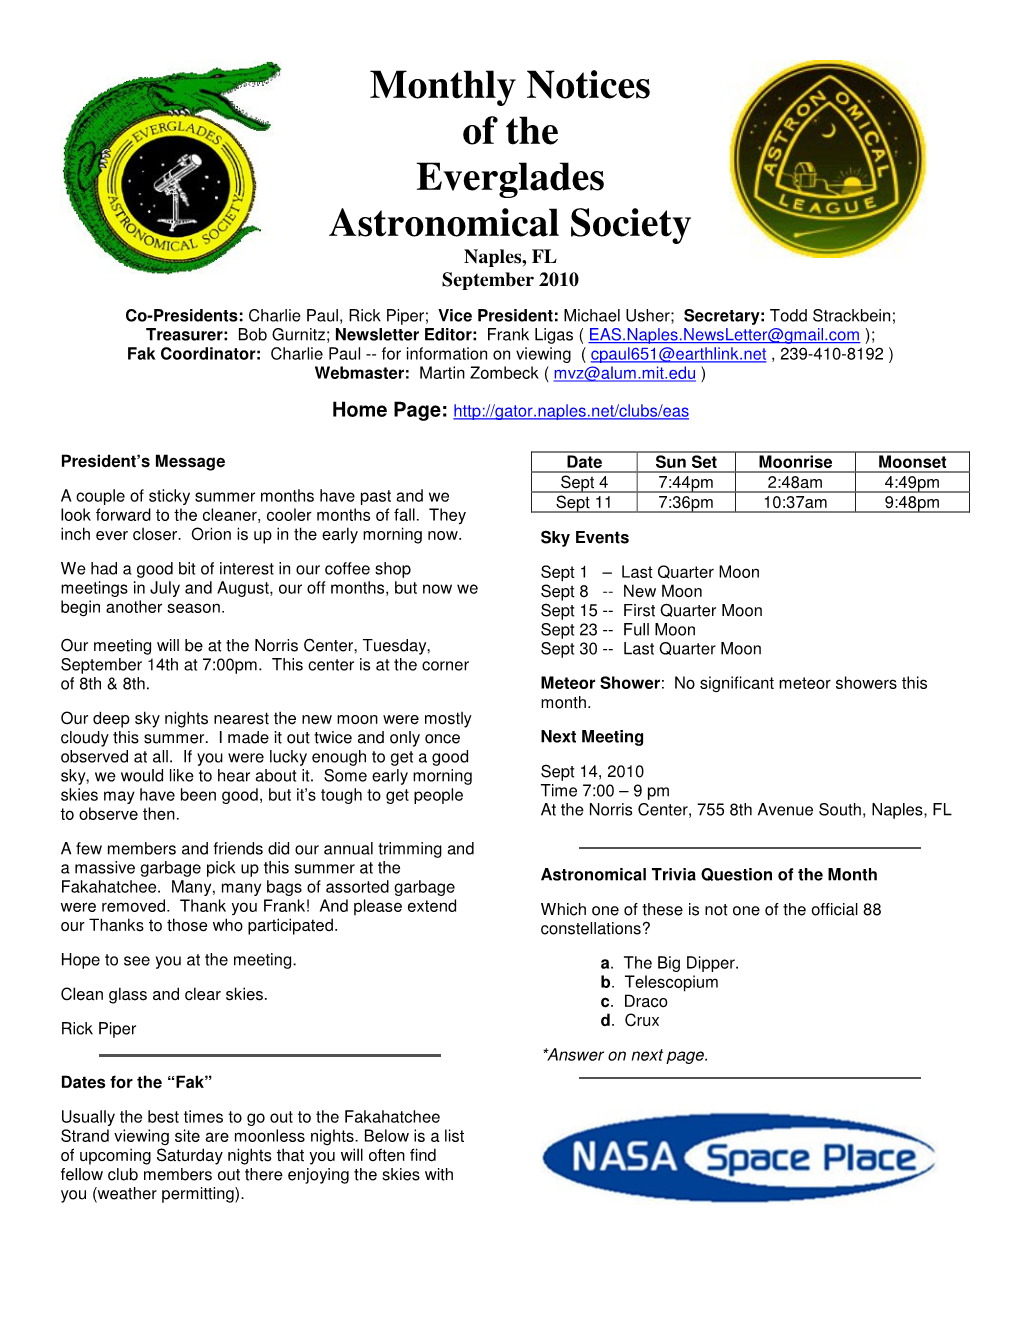 Monthly Notices of the Everglades Astronomical Society Naples, FL September 2010